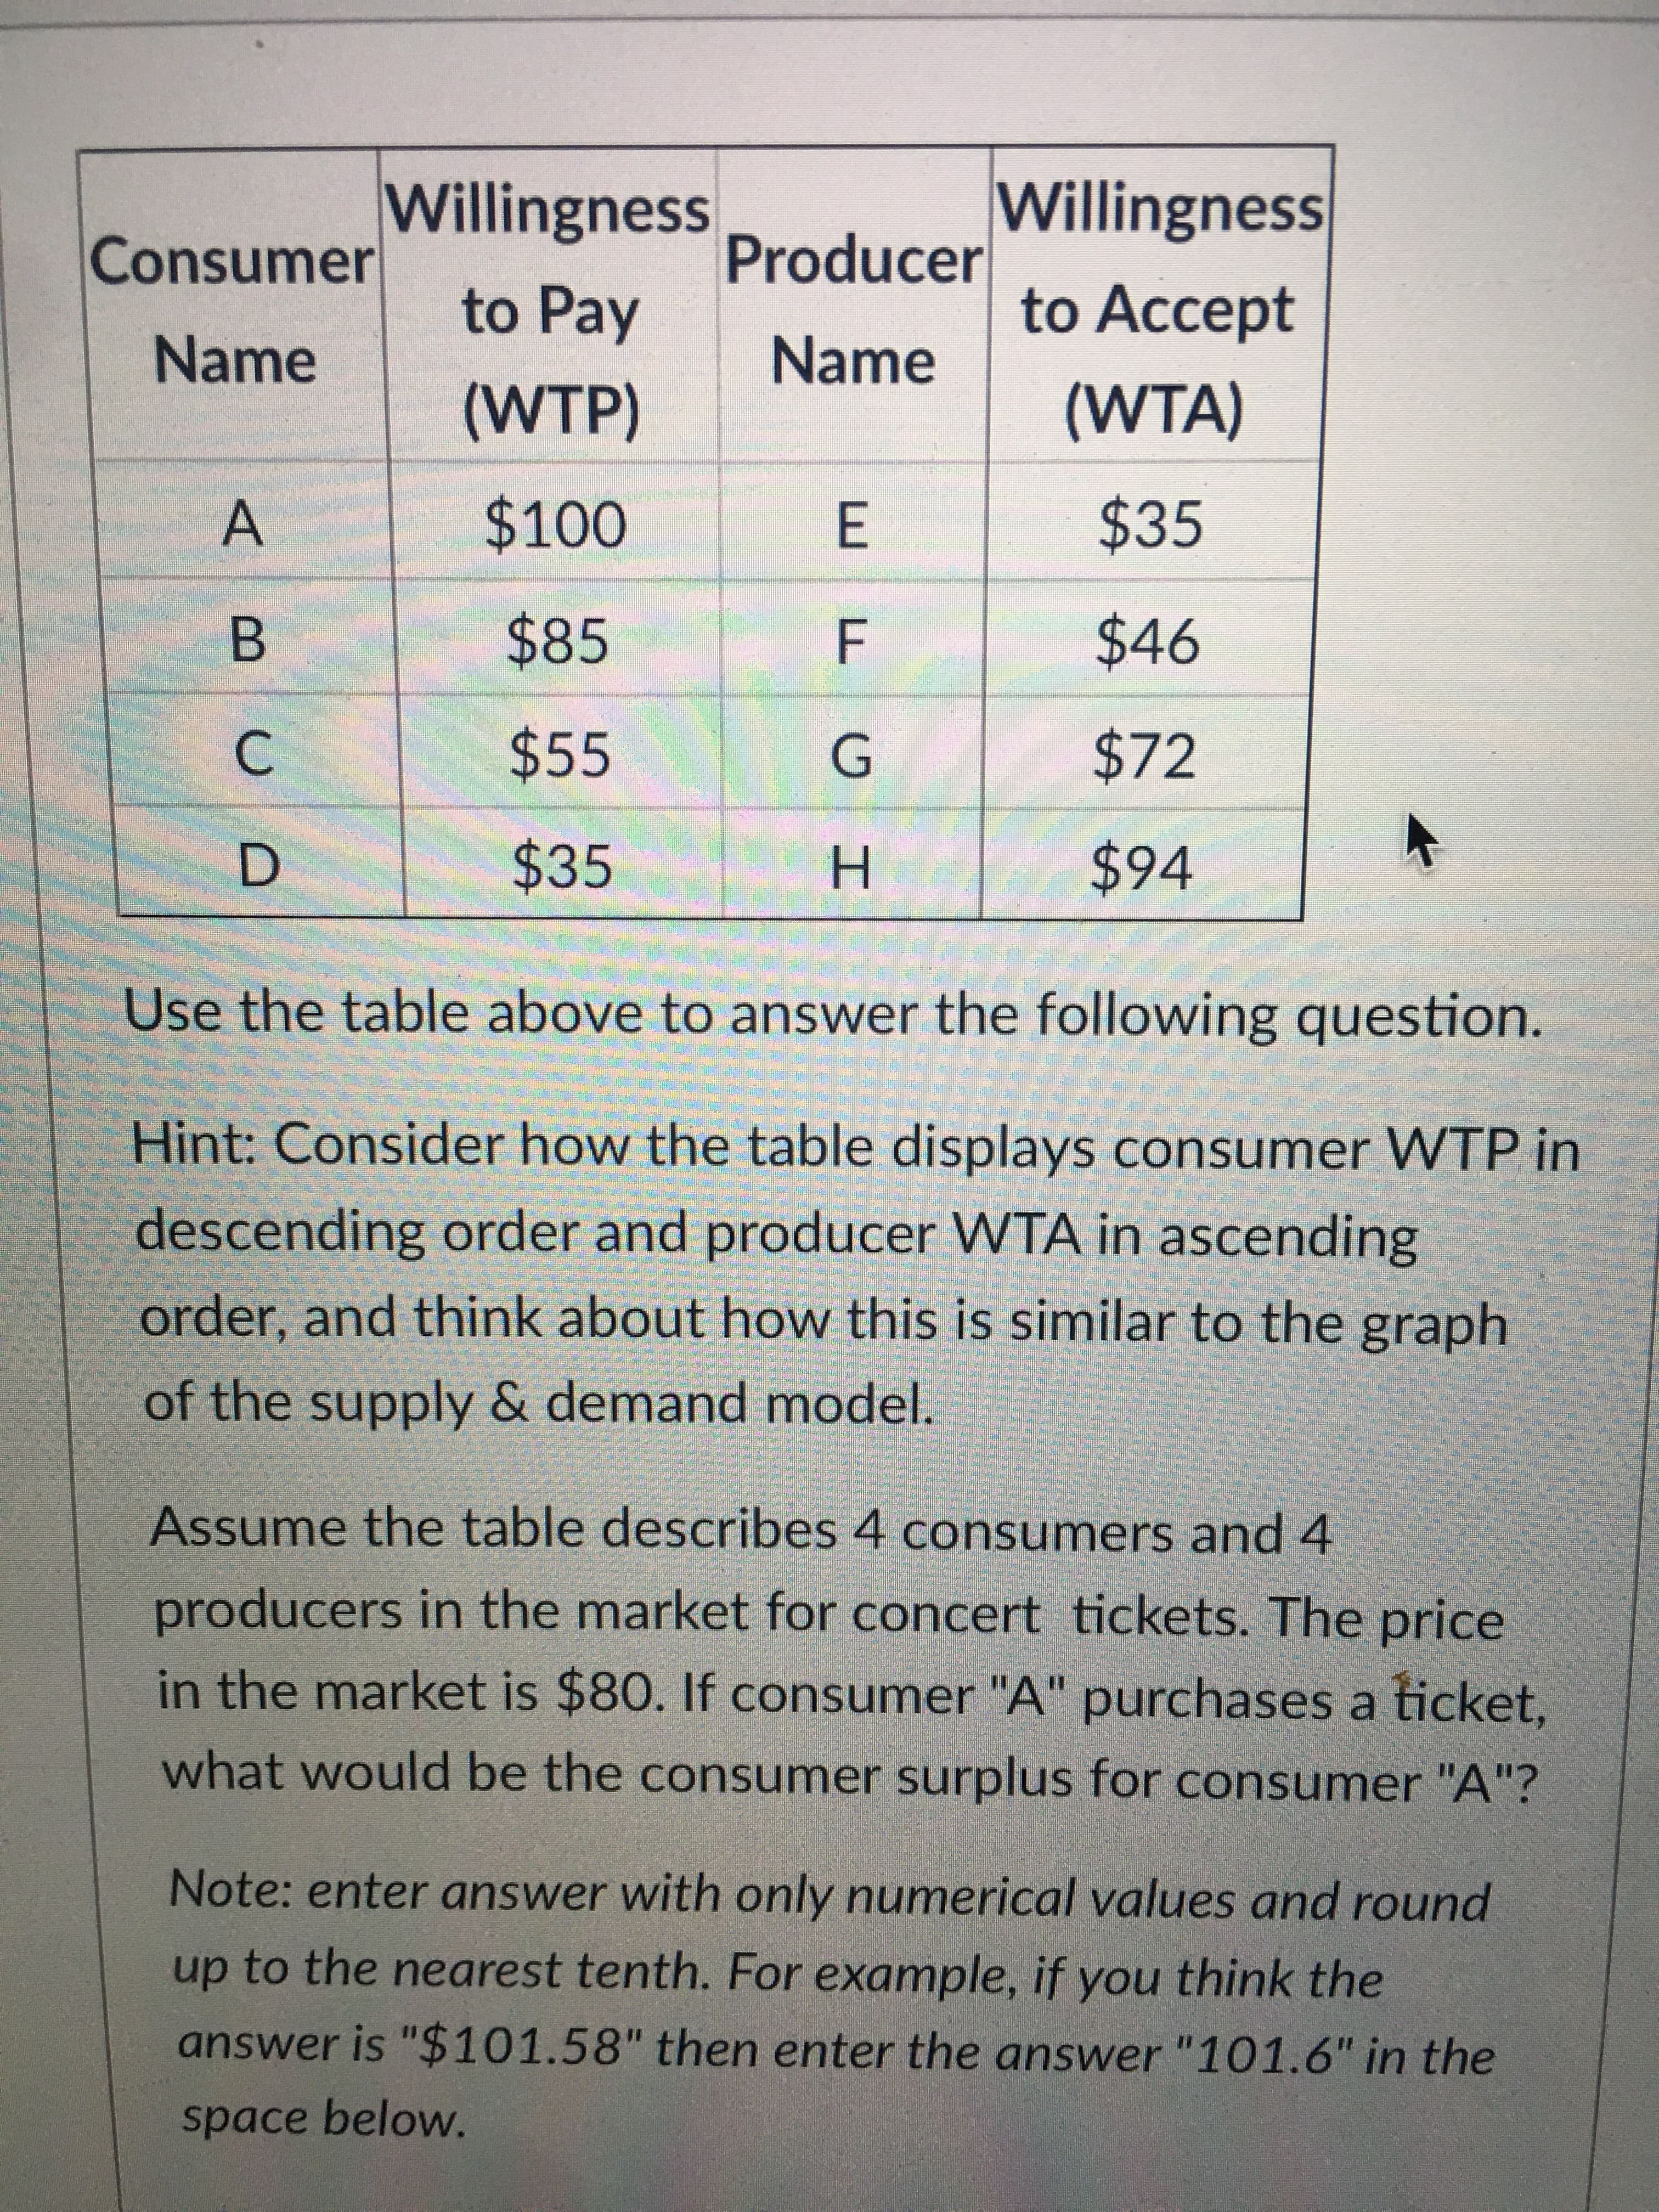 A,
Willingness
Willingness
Consumer
Producer
to Pay
to Accept
Name
Name
(WTP)
(WTA)
$35
E.
$85
$46
F.
$45
$72
C.
G.
$435
$94
D.
H.
Use the table above to answer the following question.
Hint: Consider how the table displays consumer WTP in
descending order and producer WTA in ascending
order, and think about how this is similar to the graph
of the supply & demand model.
Assume the table describes 4 consumers and 4
producers in the market for concert tickets. The price
in the market is $80. If consumer "A" purchases a ticket,
%3D
what would be the consumer surplus for consumer "A"?
Note: enter answer with only numerical values and round
up to the nearest tenth. For example, if you think the
answer is "$101.58" then enter the answer "101.6" in the
space below.
